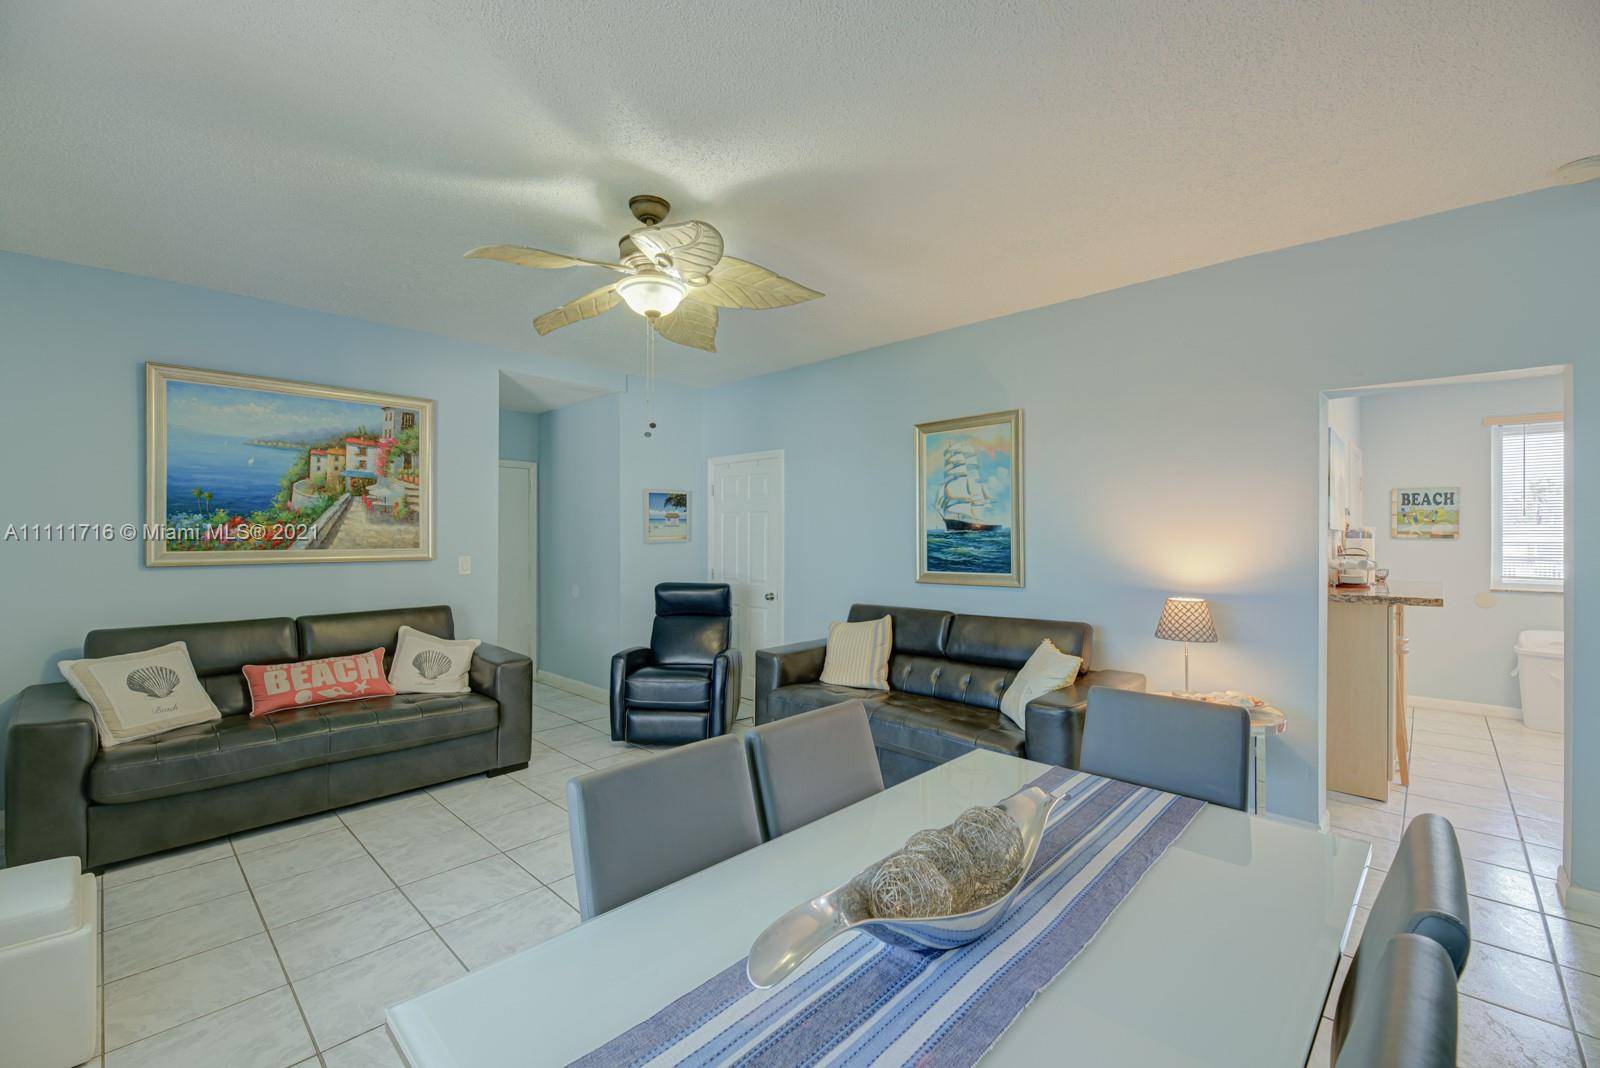 HOT ! ! Hollywood Beach Boardwalk 1 Bedroom 1 bath with gated assigned parking.